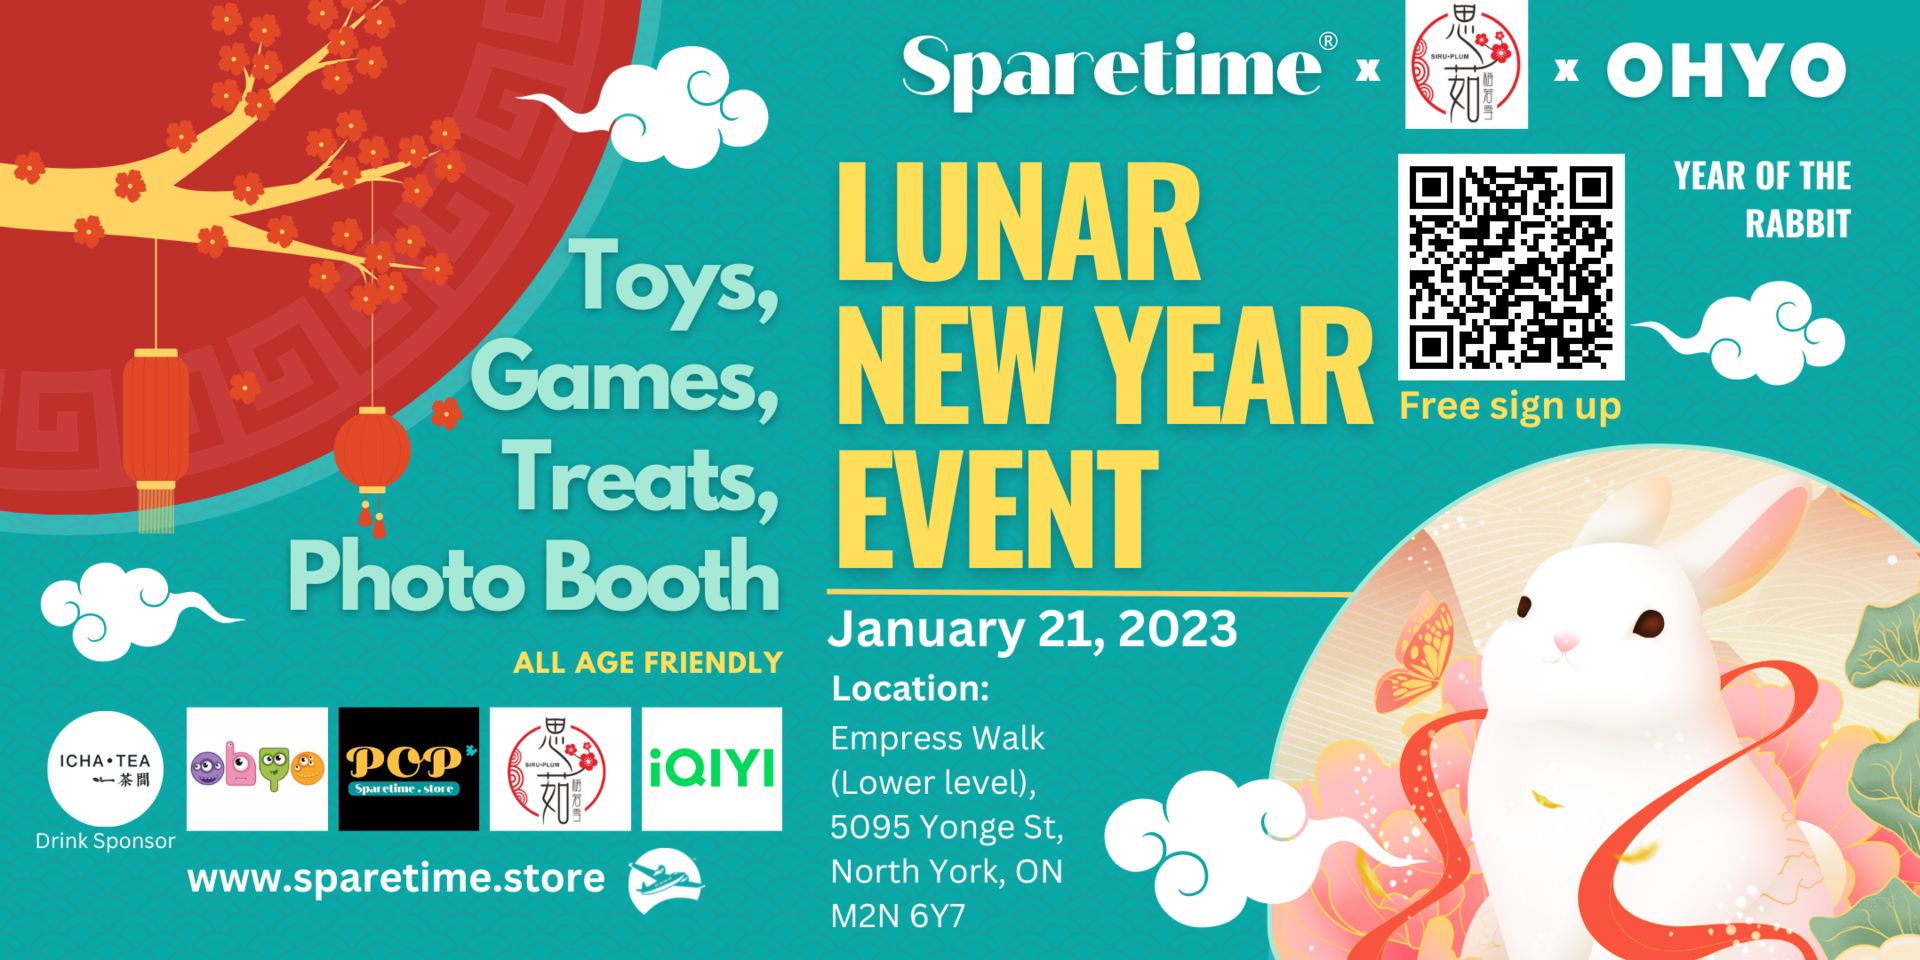 Sparetime x Siruplum x OHYO Lunar New Year Toys and Red Pocket event, Toronto, Ontario, Canada